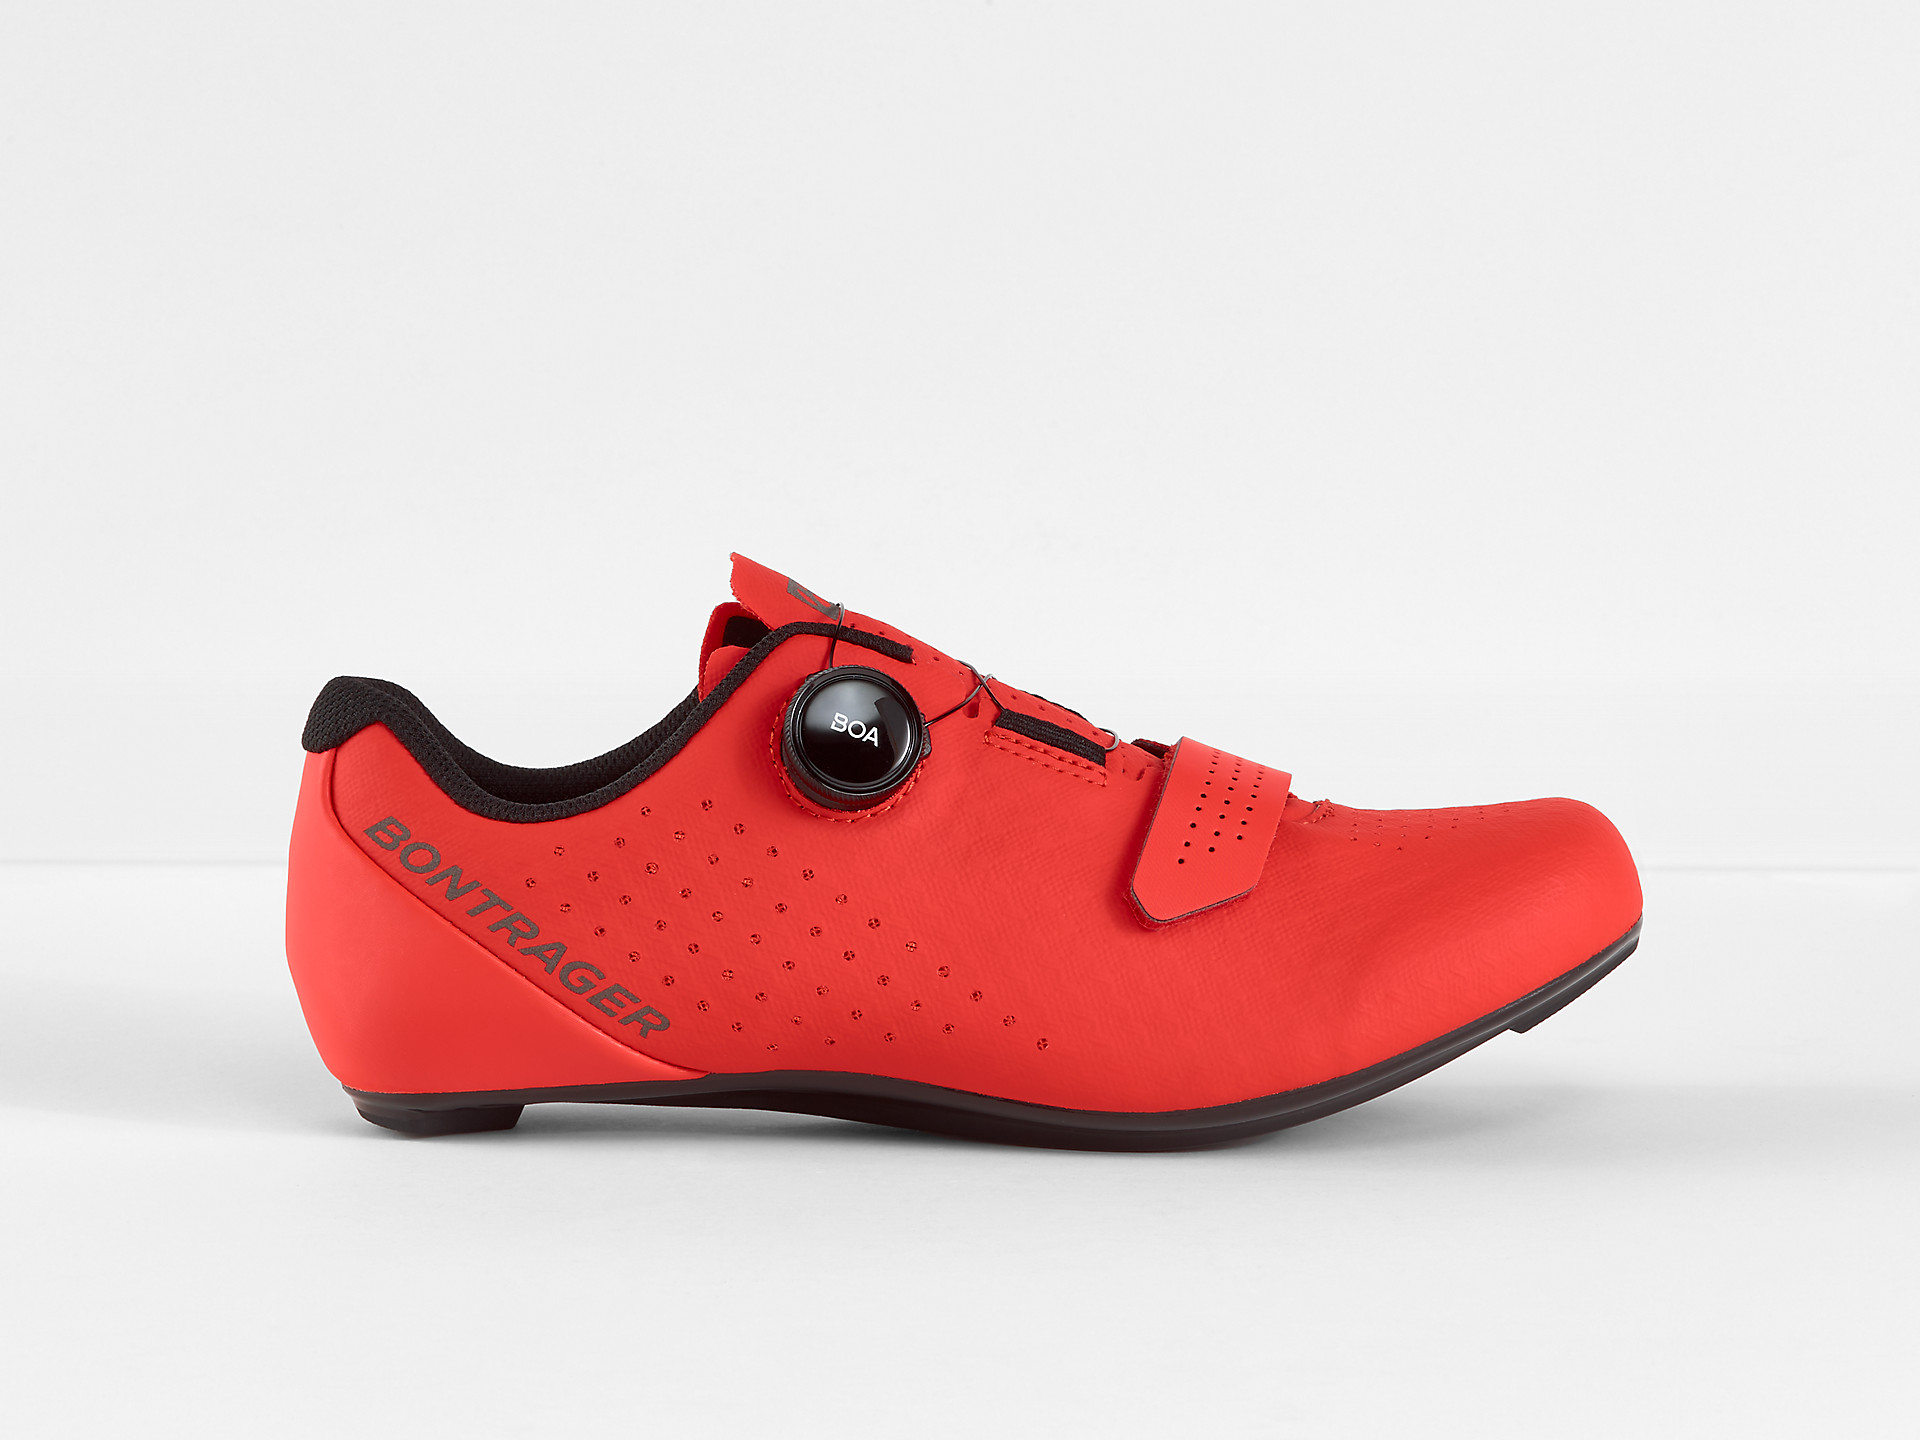 <a href="https://cycles-clement.be/product/chaussure-bont-circuit-race-40-red/">CHAUSSURE BONT CIRCUIT RACE 40 RED</a>